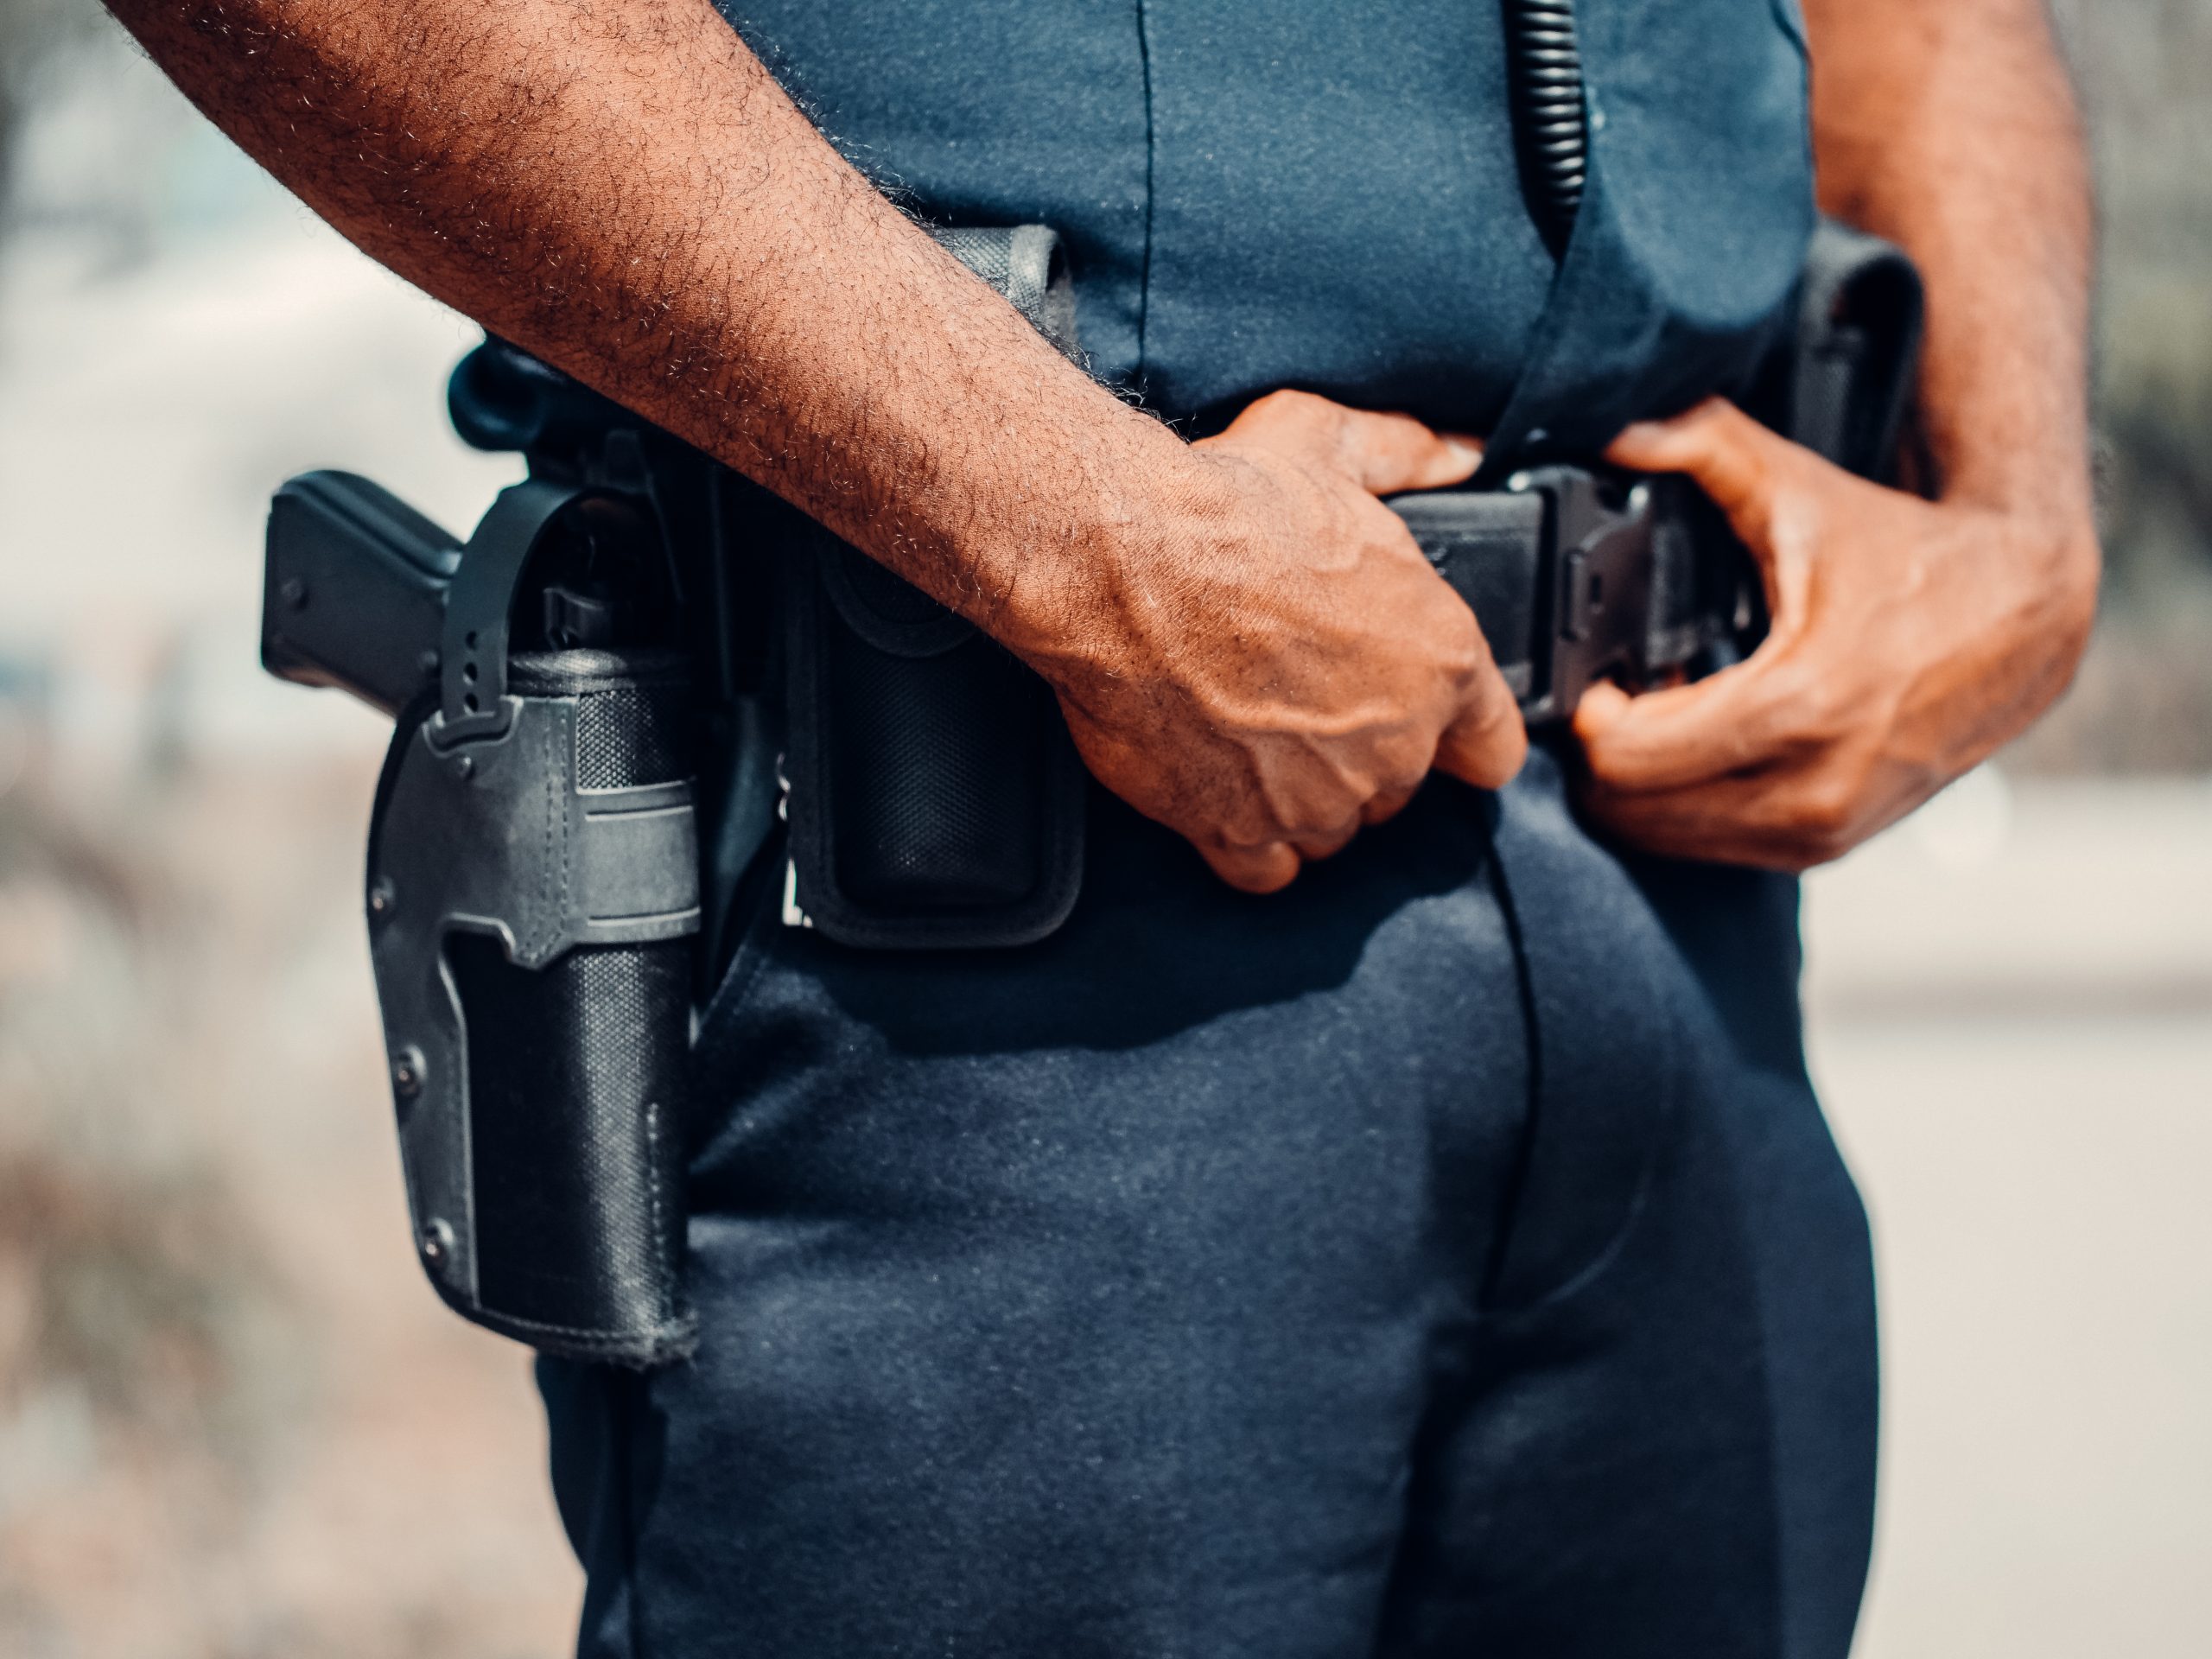 How a Magazine Holster Can Improve Your Firearm Training